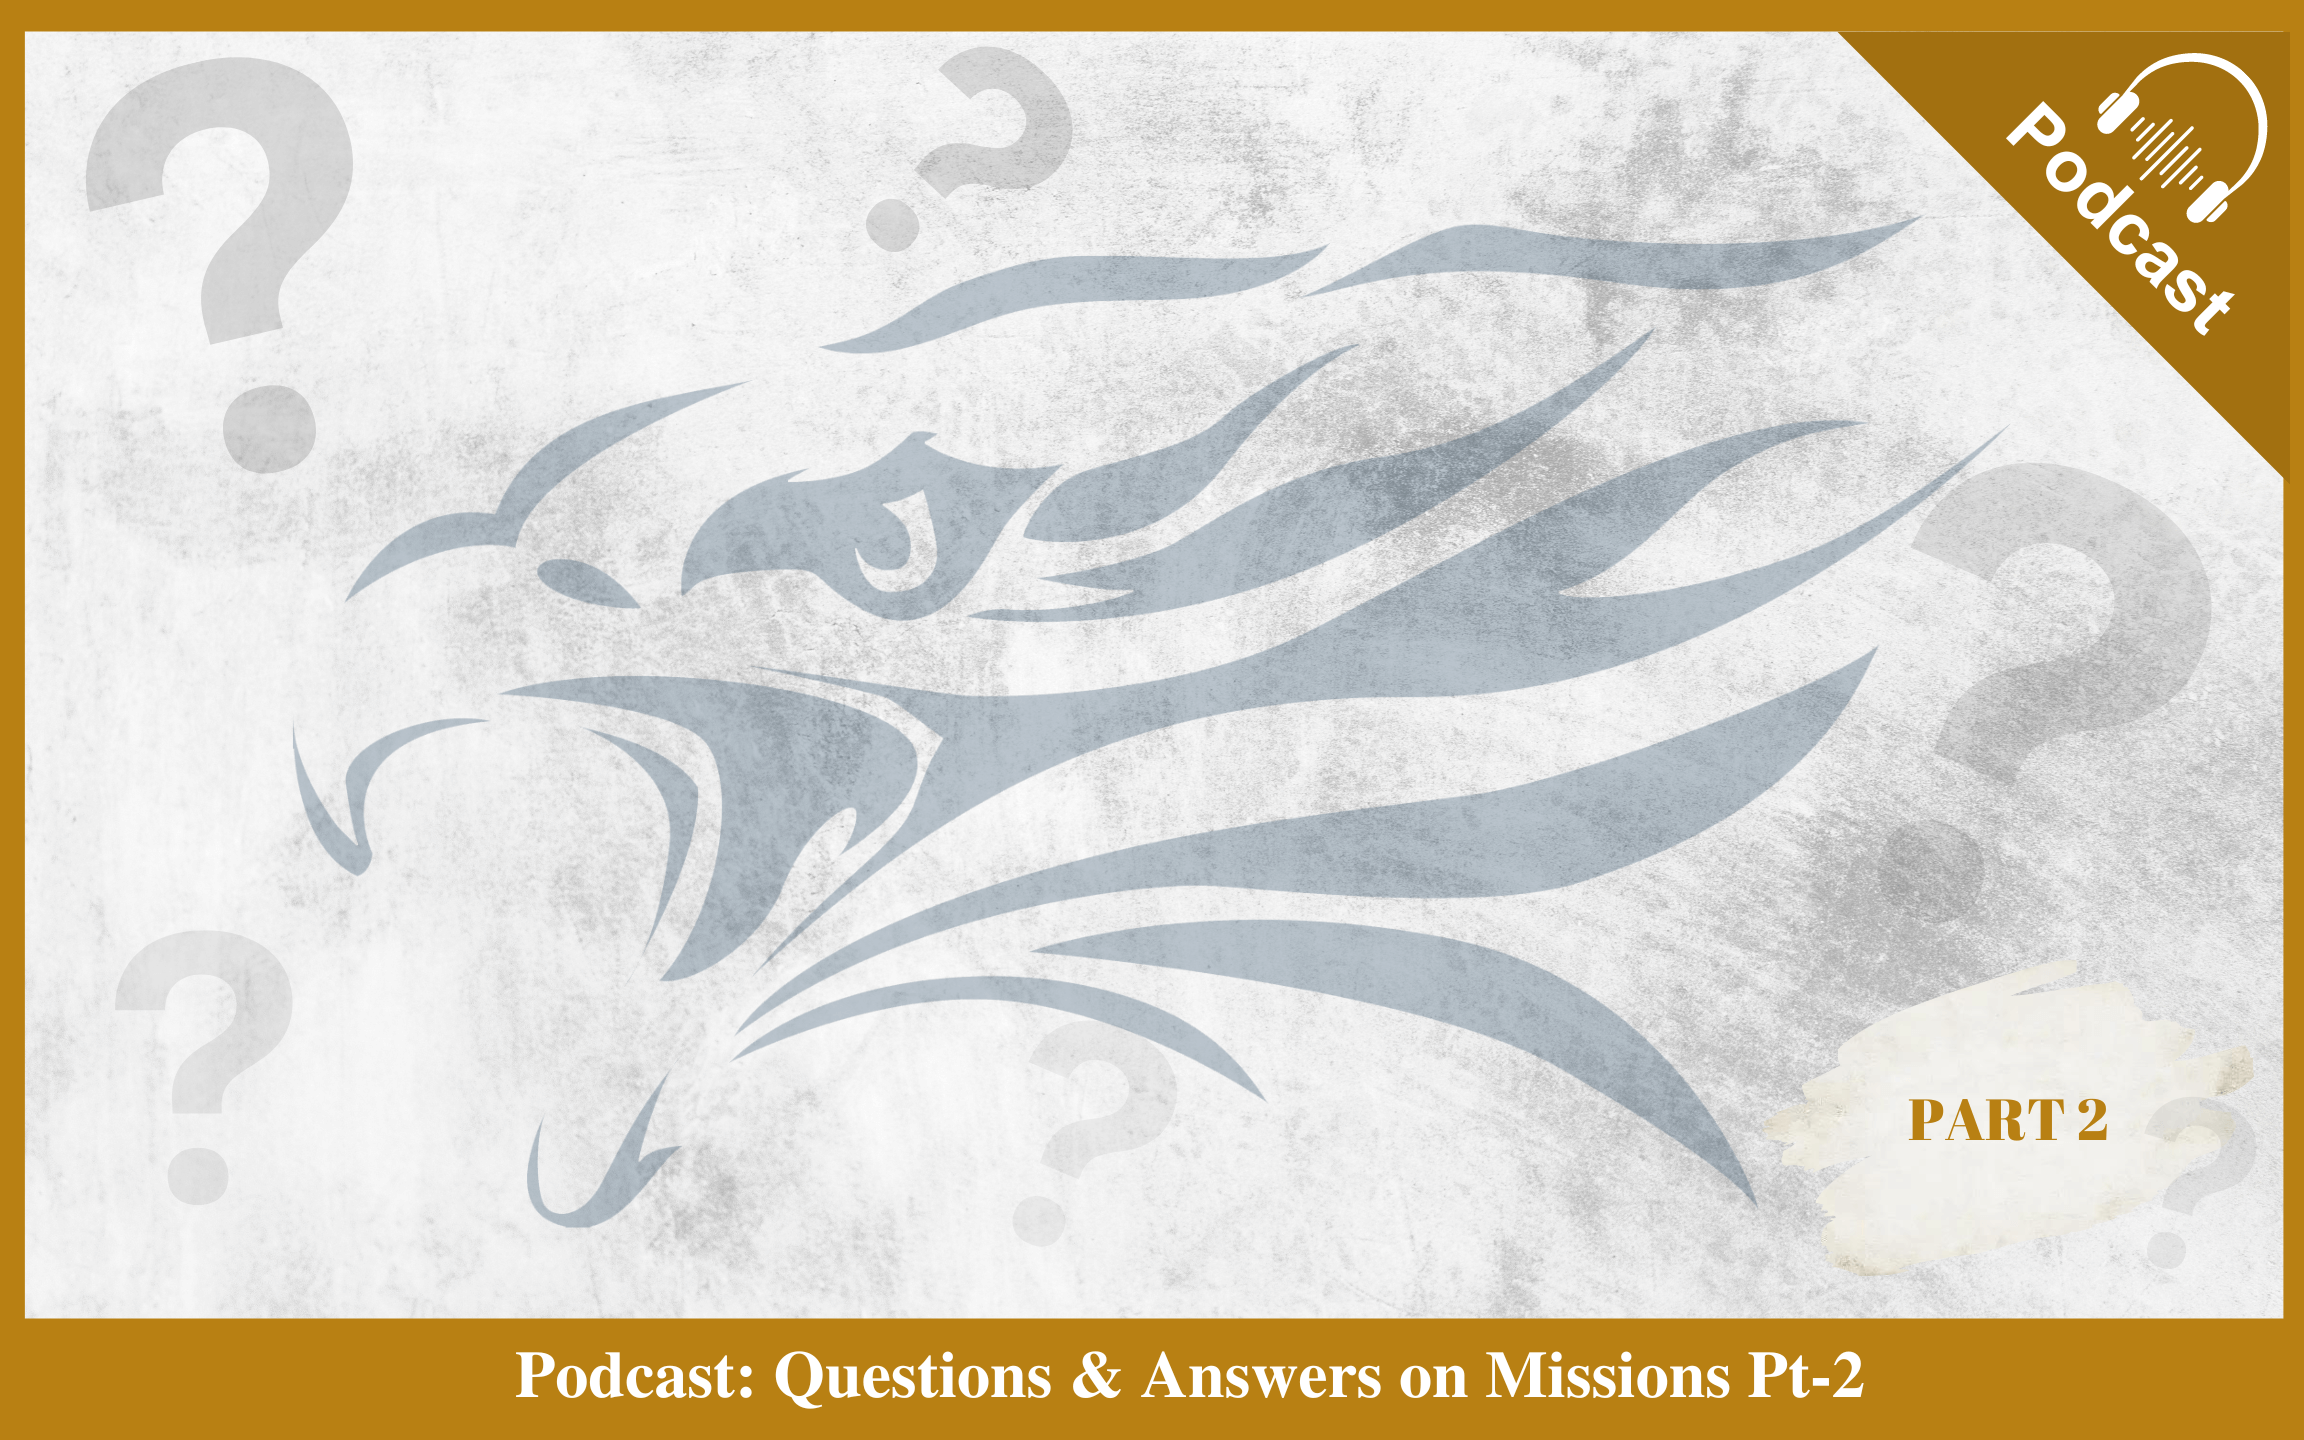 Podcast: Questions & Answers On Missions Pt-2